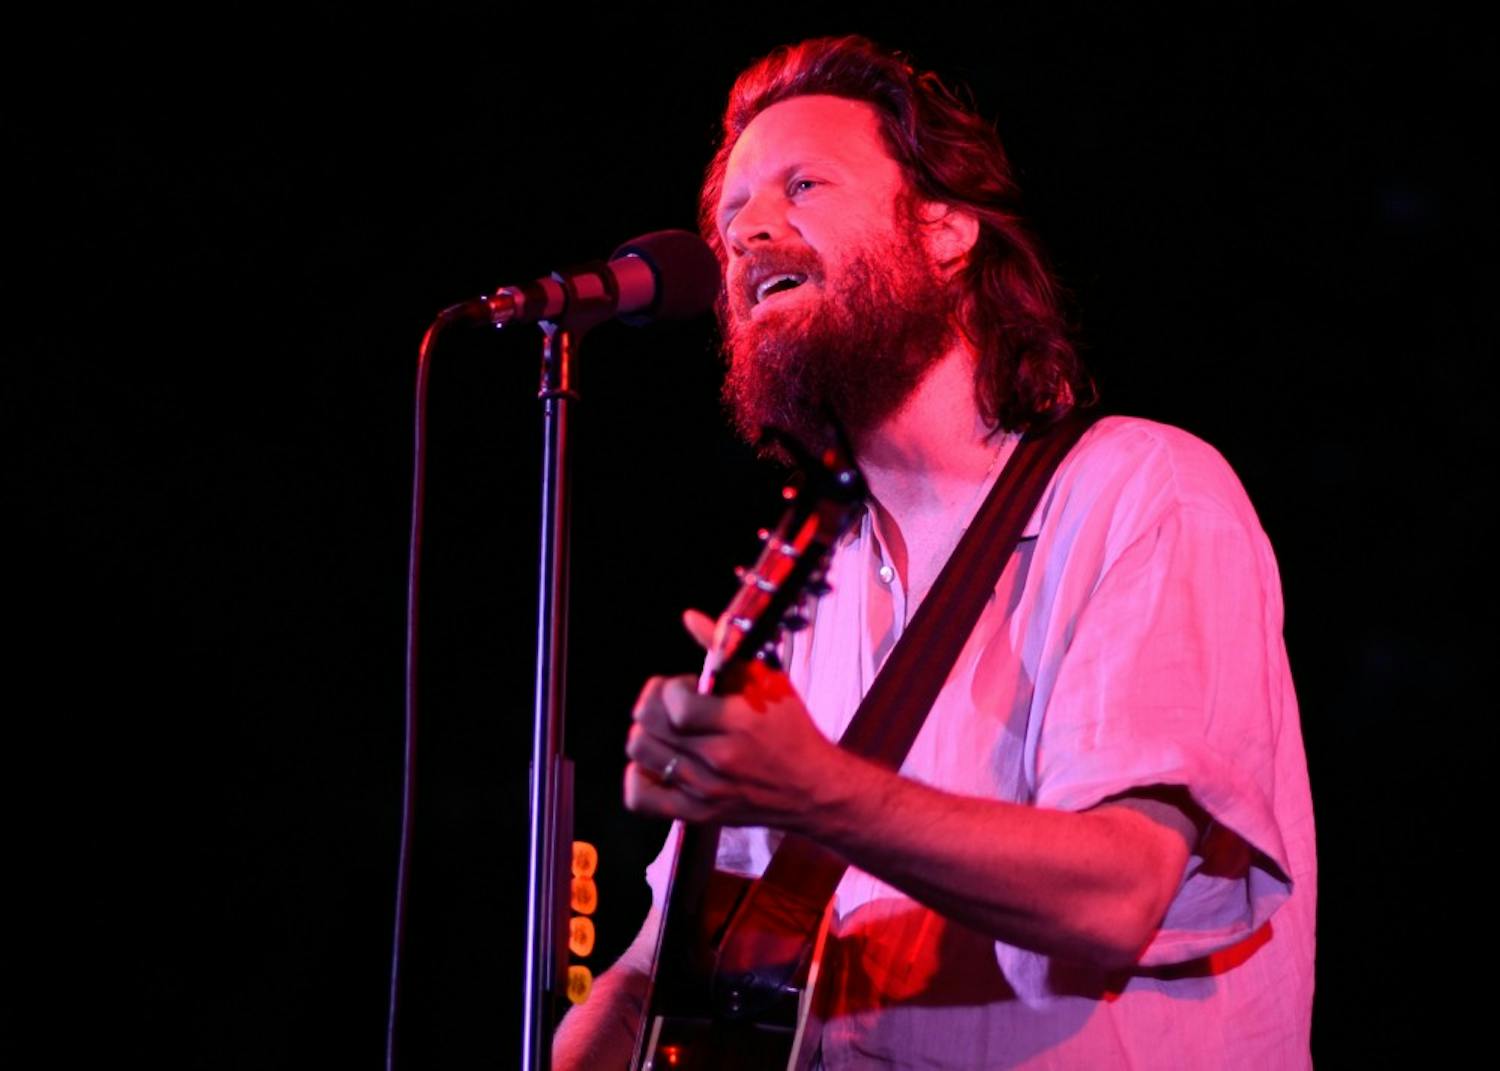 Father John Misty performs Friday evening at Upland Brewing Co. as part of Granfalloon: A Kurt Vonnegut Convergence. The festival, a celebration of the life and works of Kurt Vonnegut, will feature artists Noname, Waxahatchee and others Saturday.